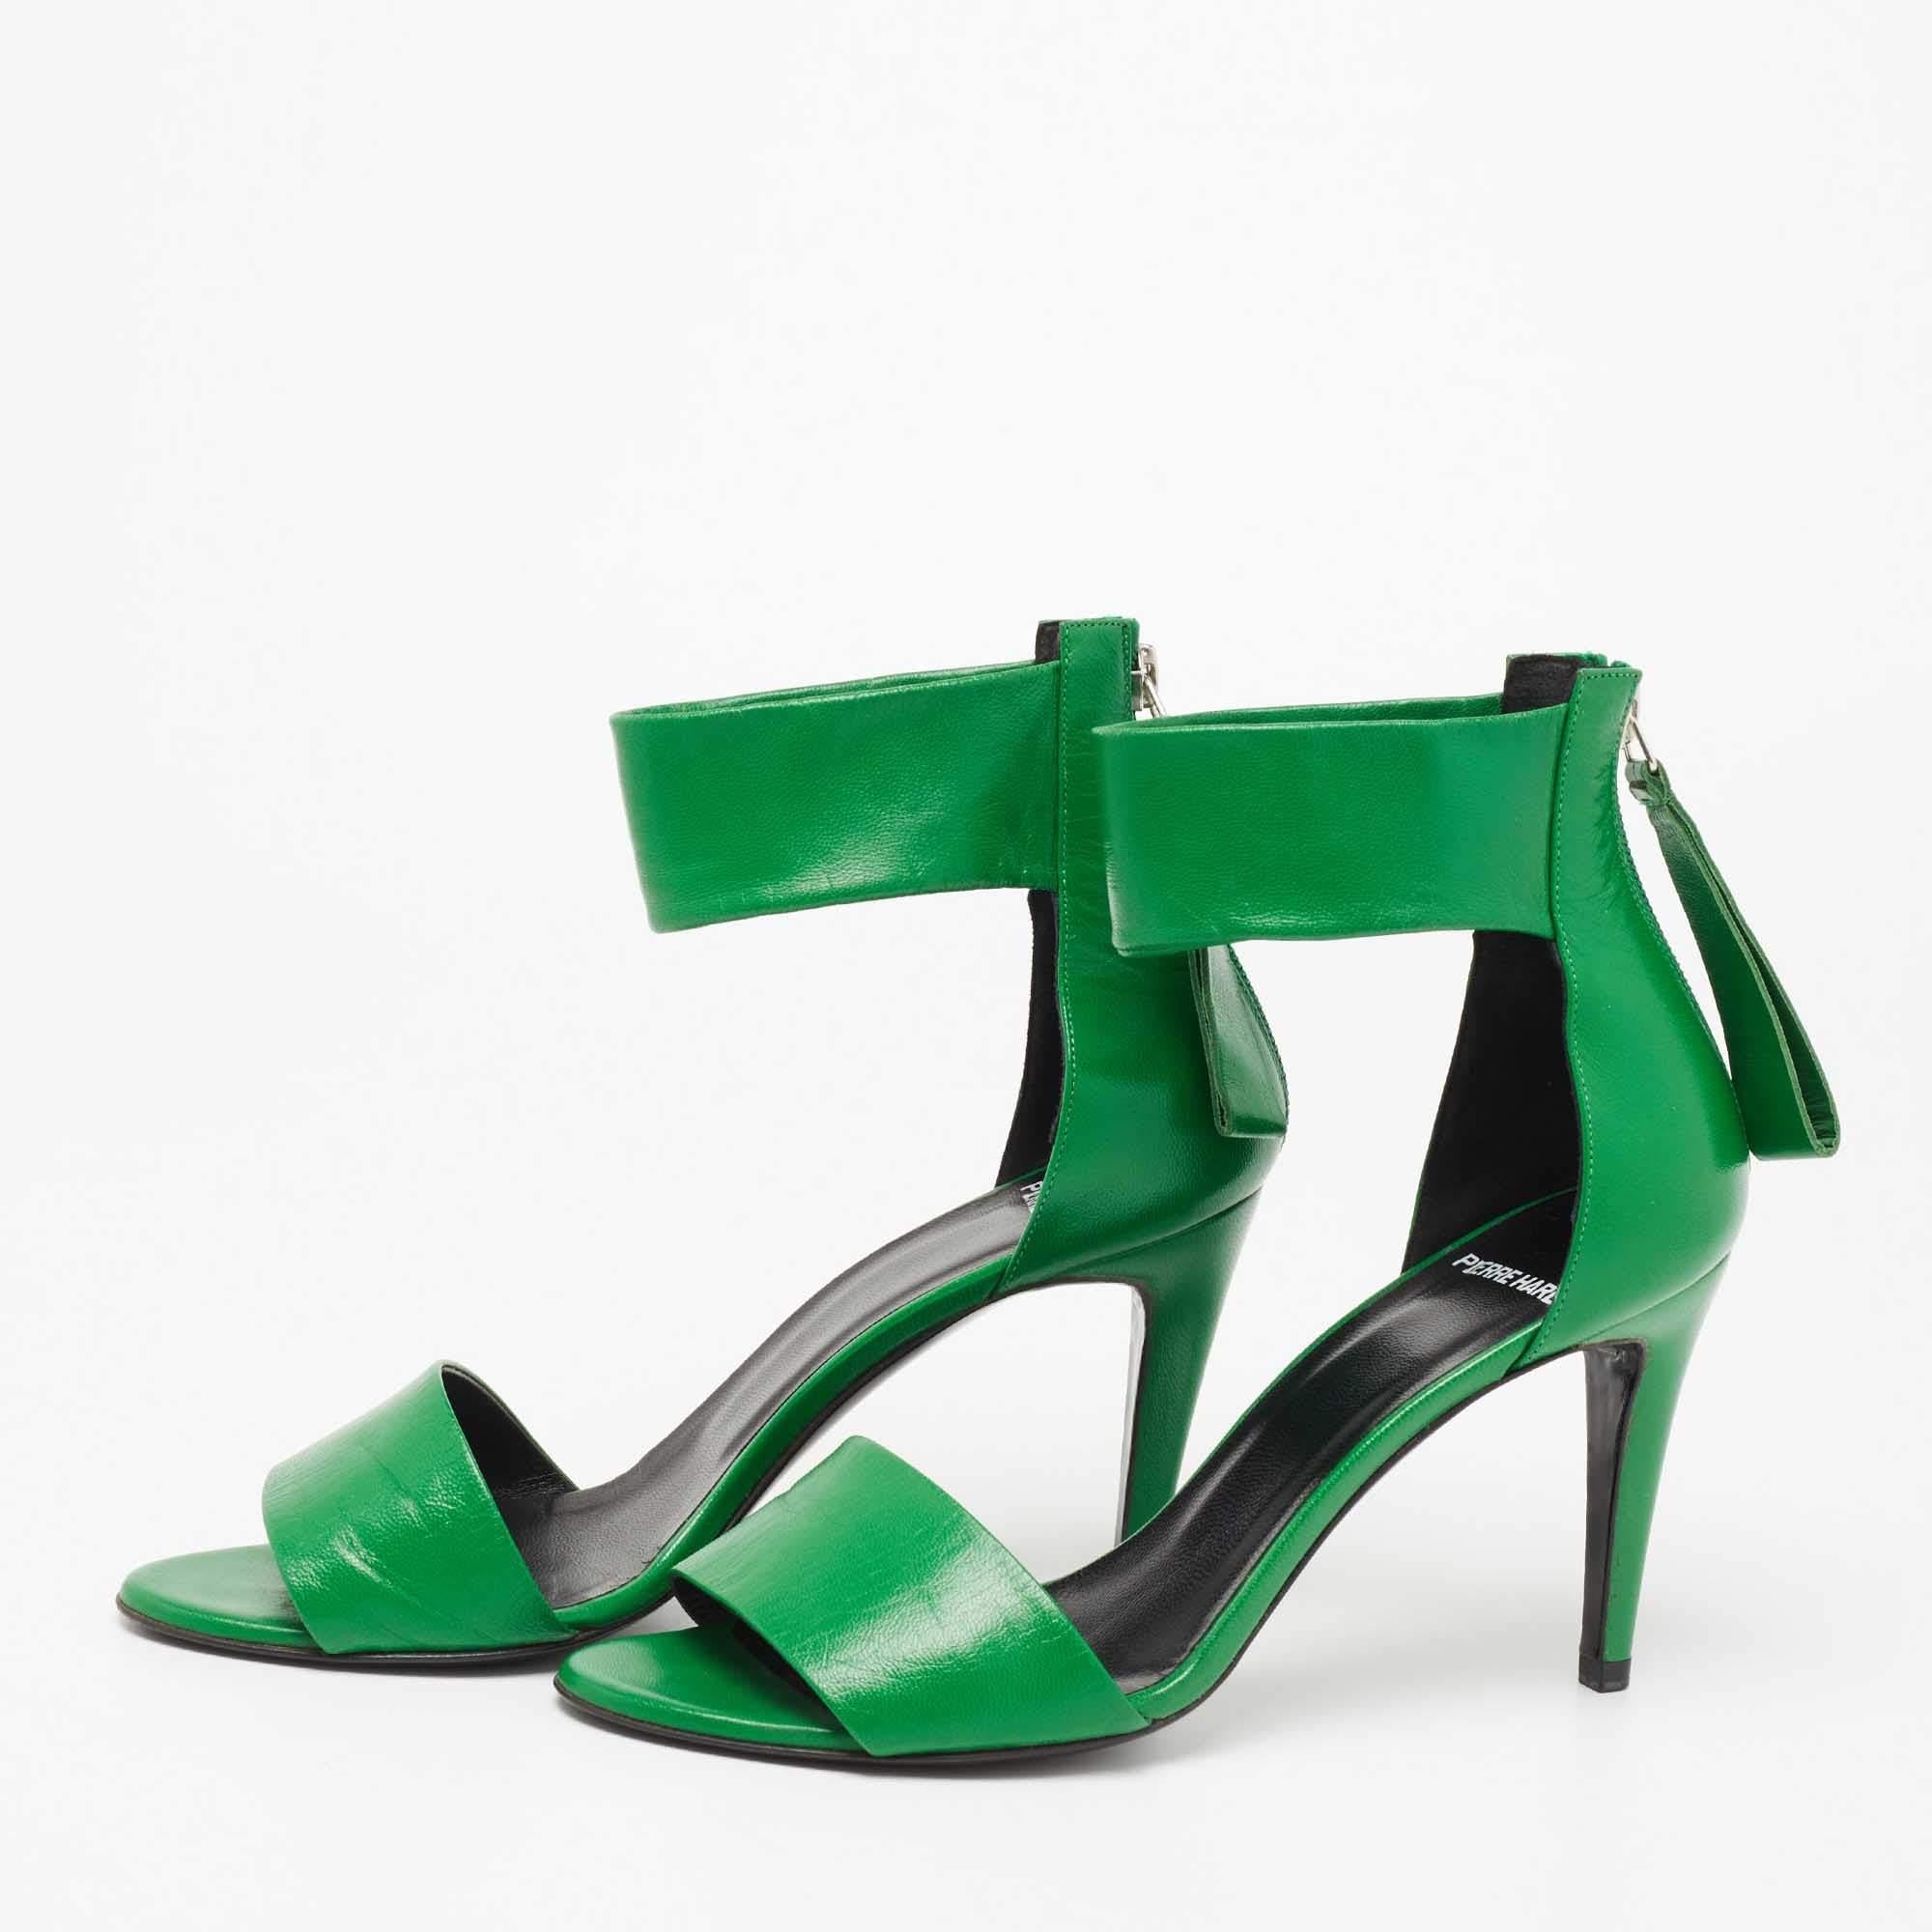 The ankle strap of these Pierre Hardy sandals will elegantly hug your feet. Constructed from leather, they flaunt a zipper closure on the counters, open toes, and 9cm heels.

